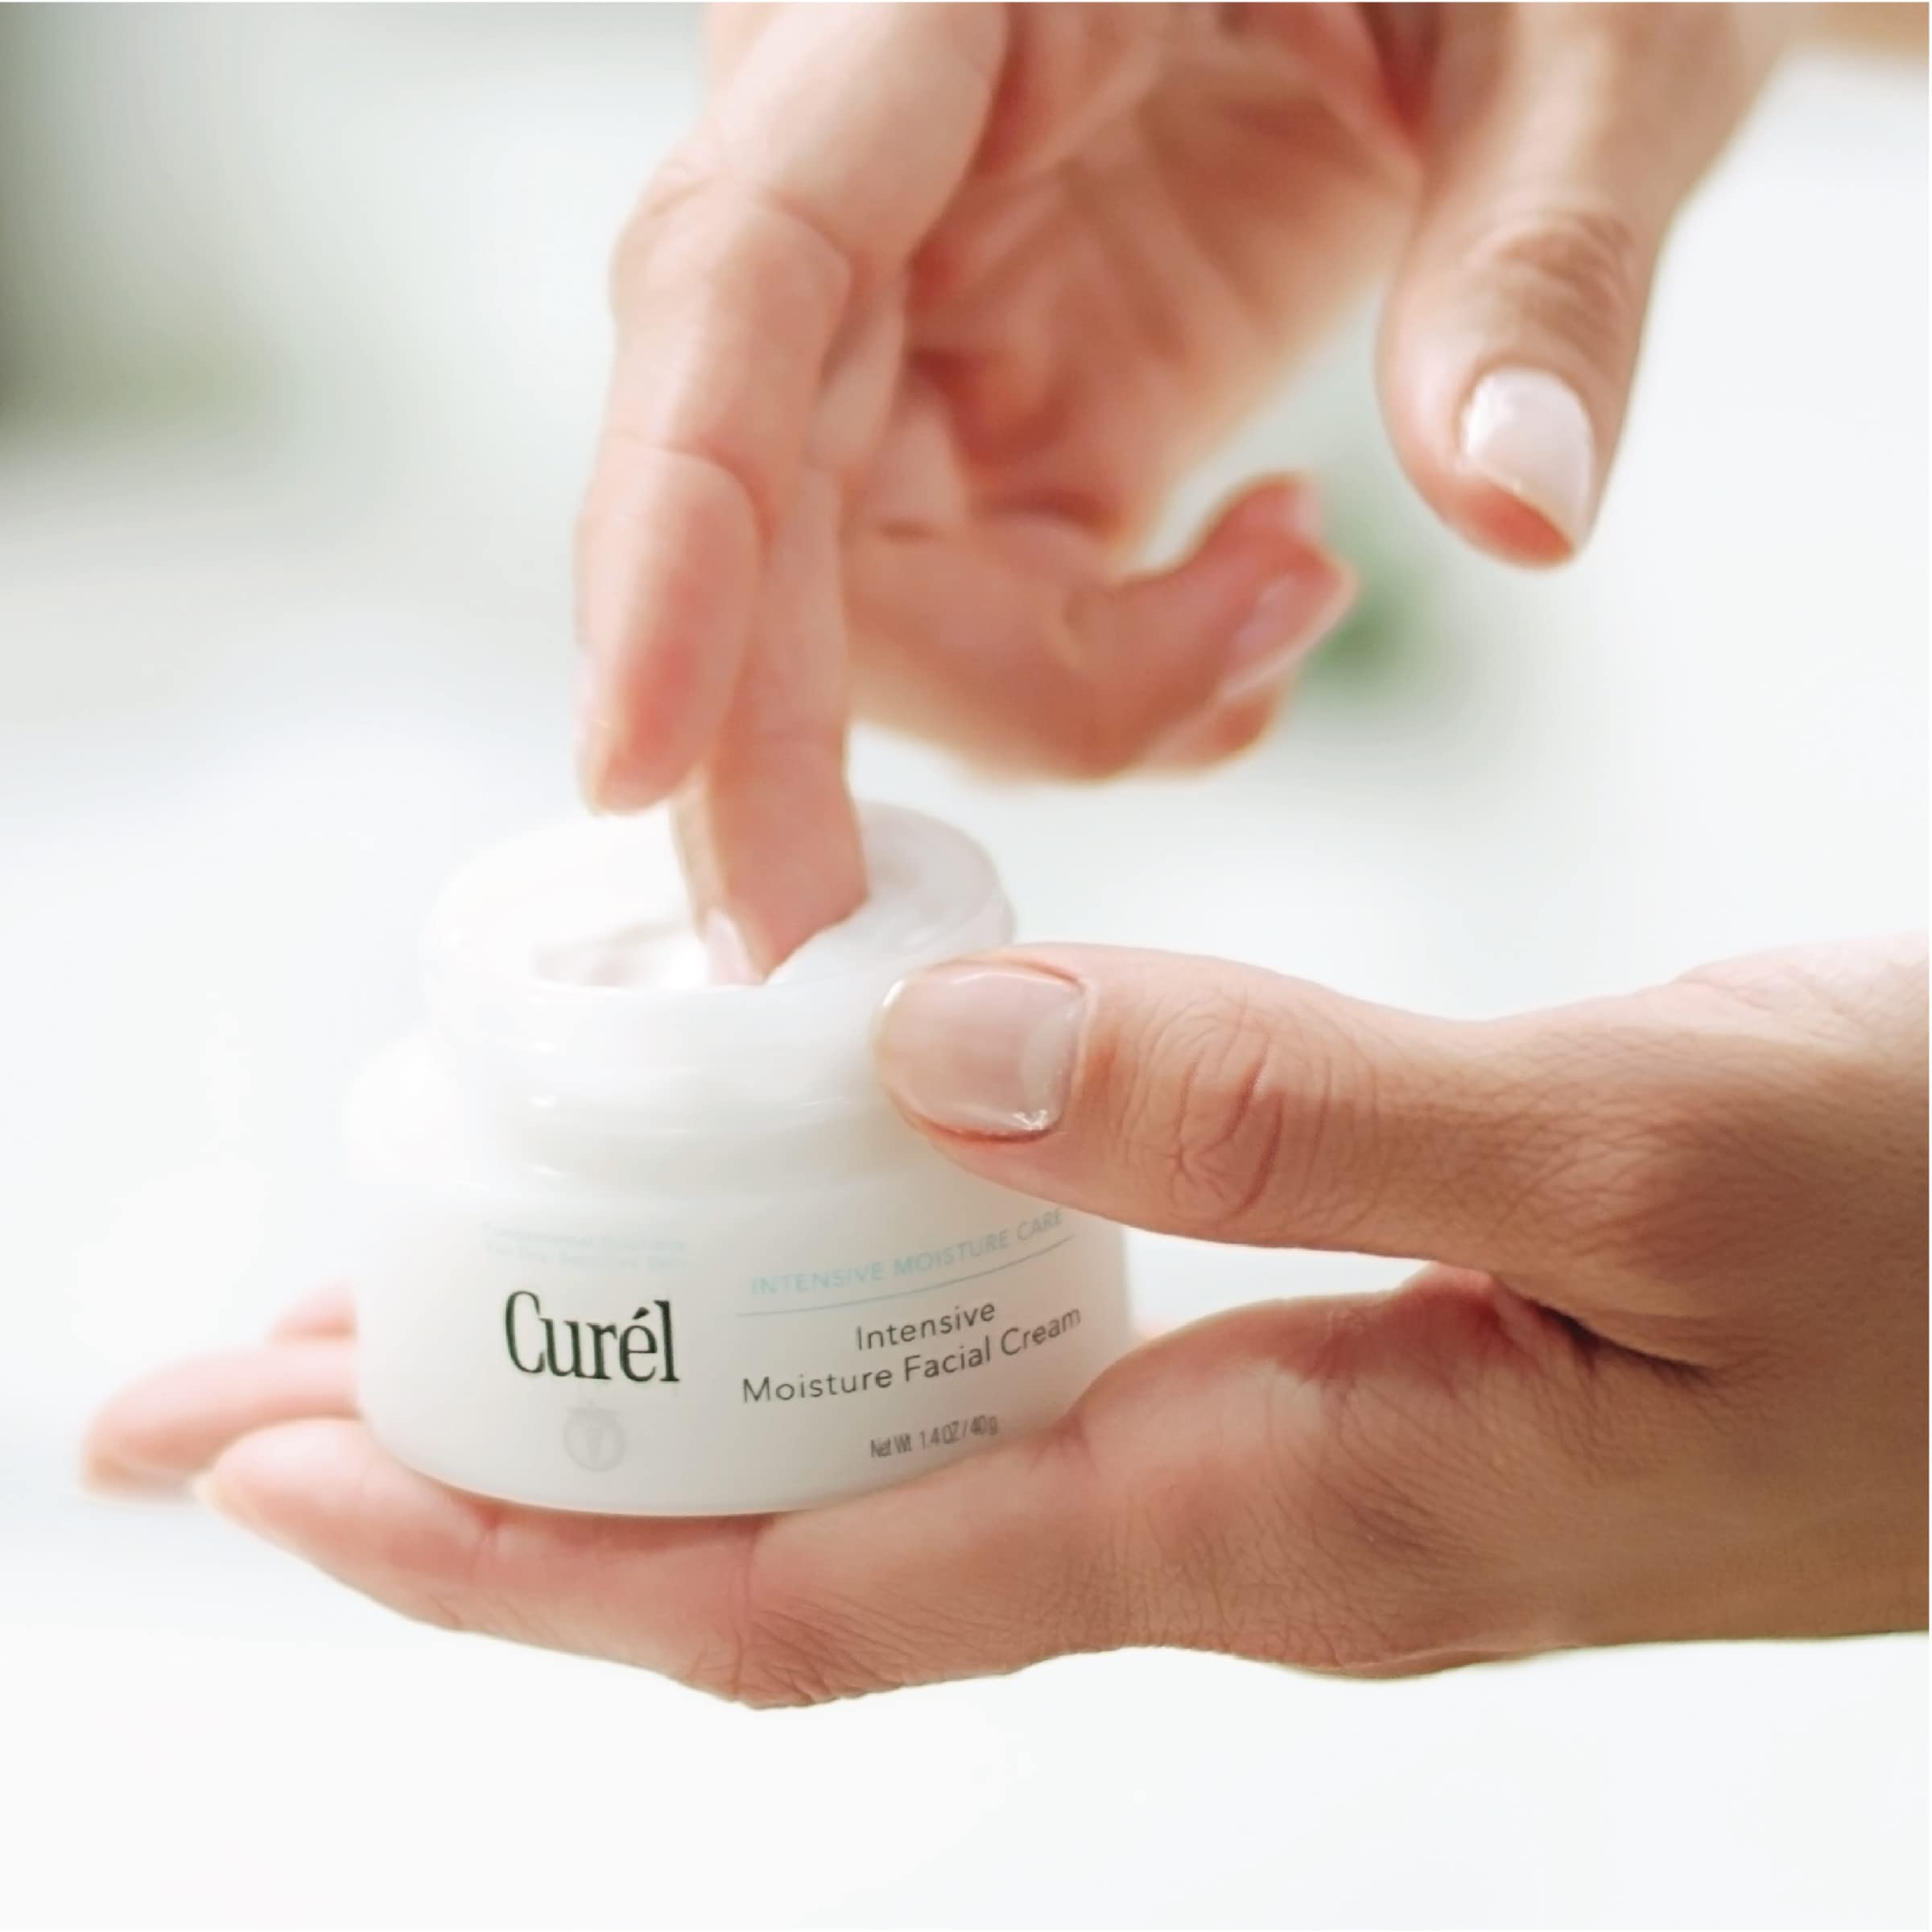 Curel Japanese Skin Care Intensive Face Moisturizer Cream, Face Lotion for Dry to Very Dry Sensitive Skin, For Women and Men, Anti-Aging Fragrance-Free Anti-Wrinkle Japanese Skin Care, 1.4 oz